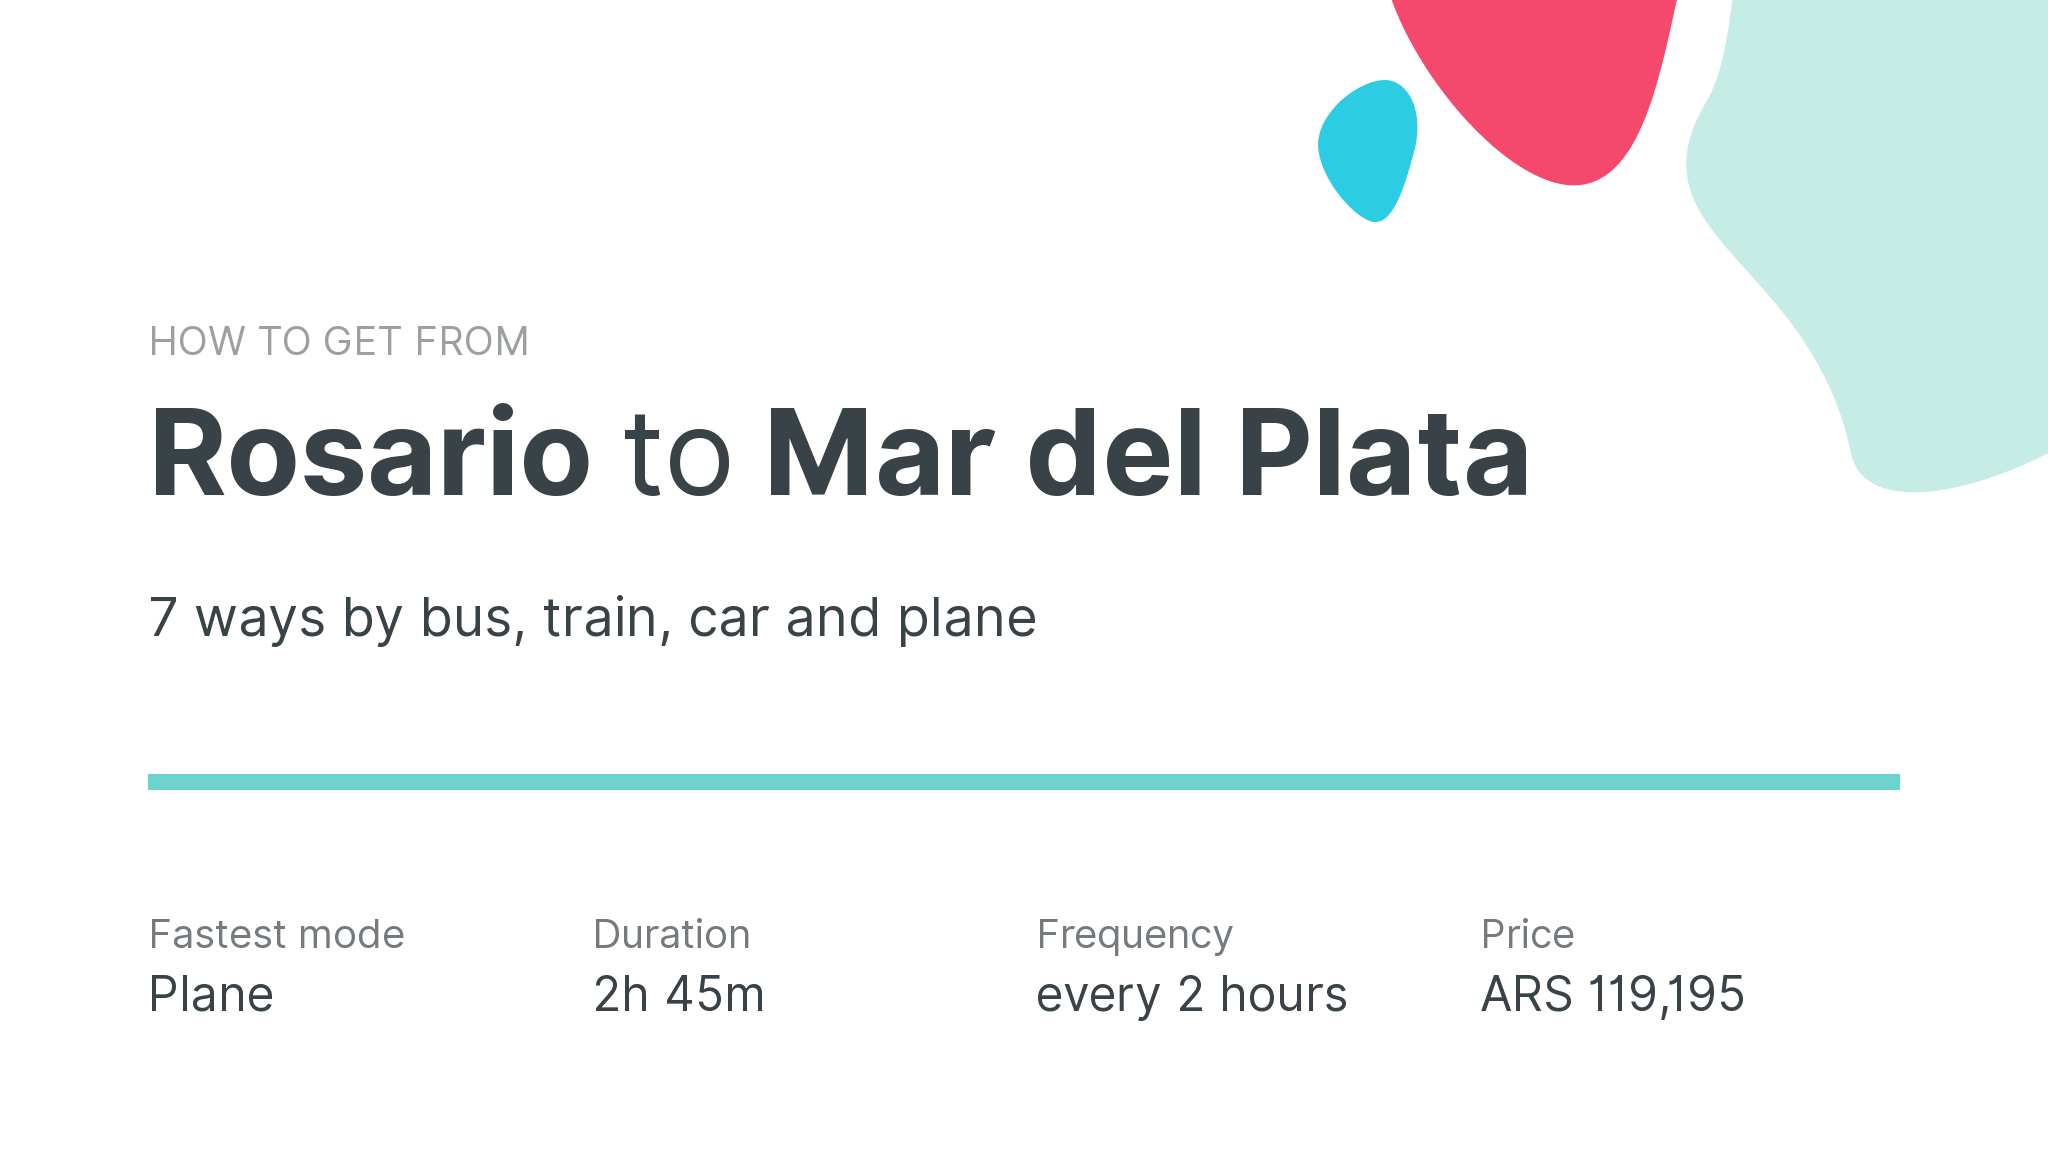 How do I get from Rosario to Mar del Plata